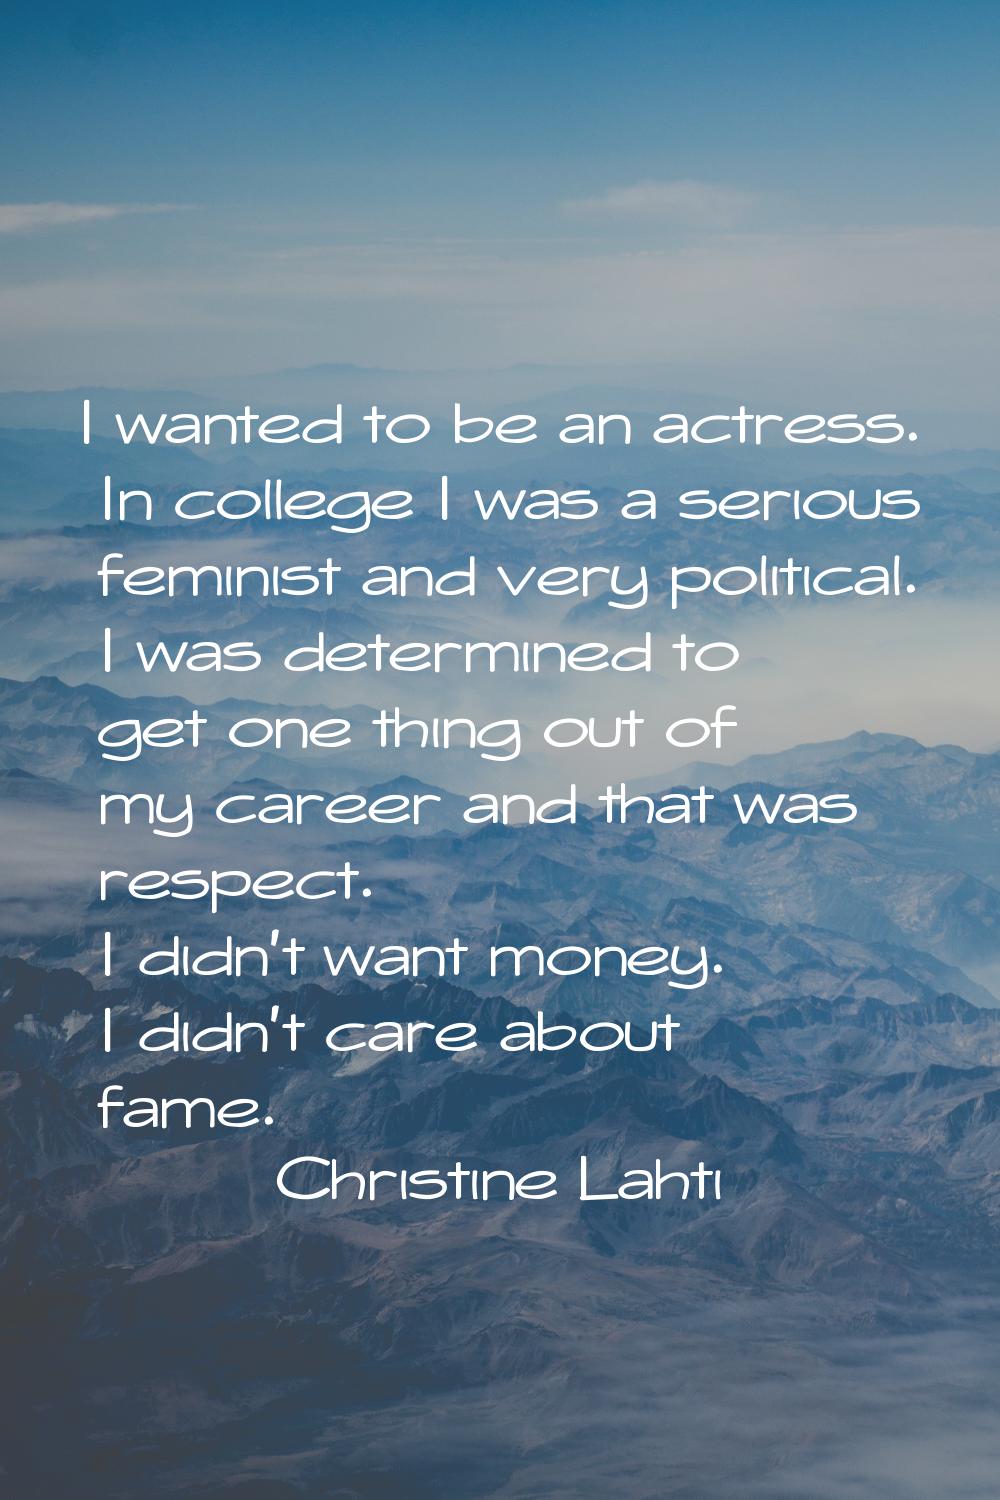 I wanted to be an actress. In college I was a serious feminist and very political. I was determined